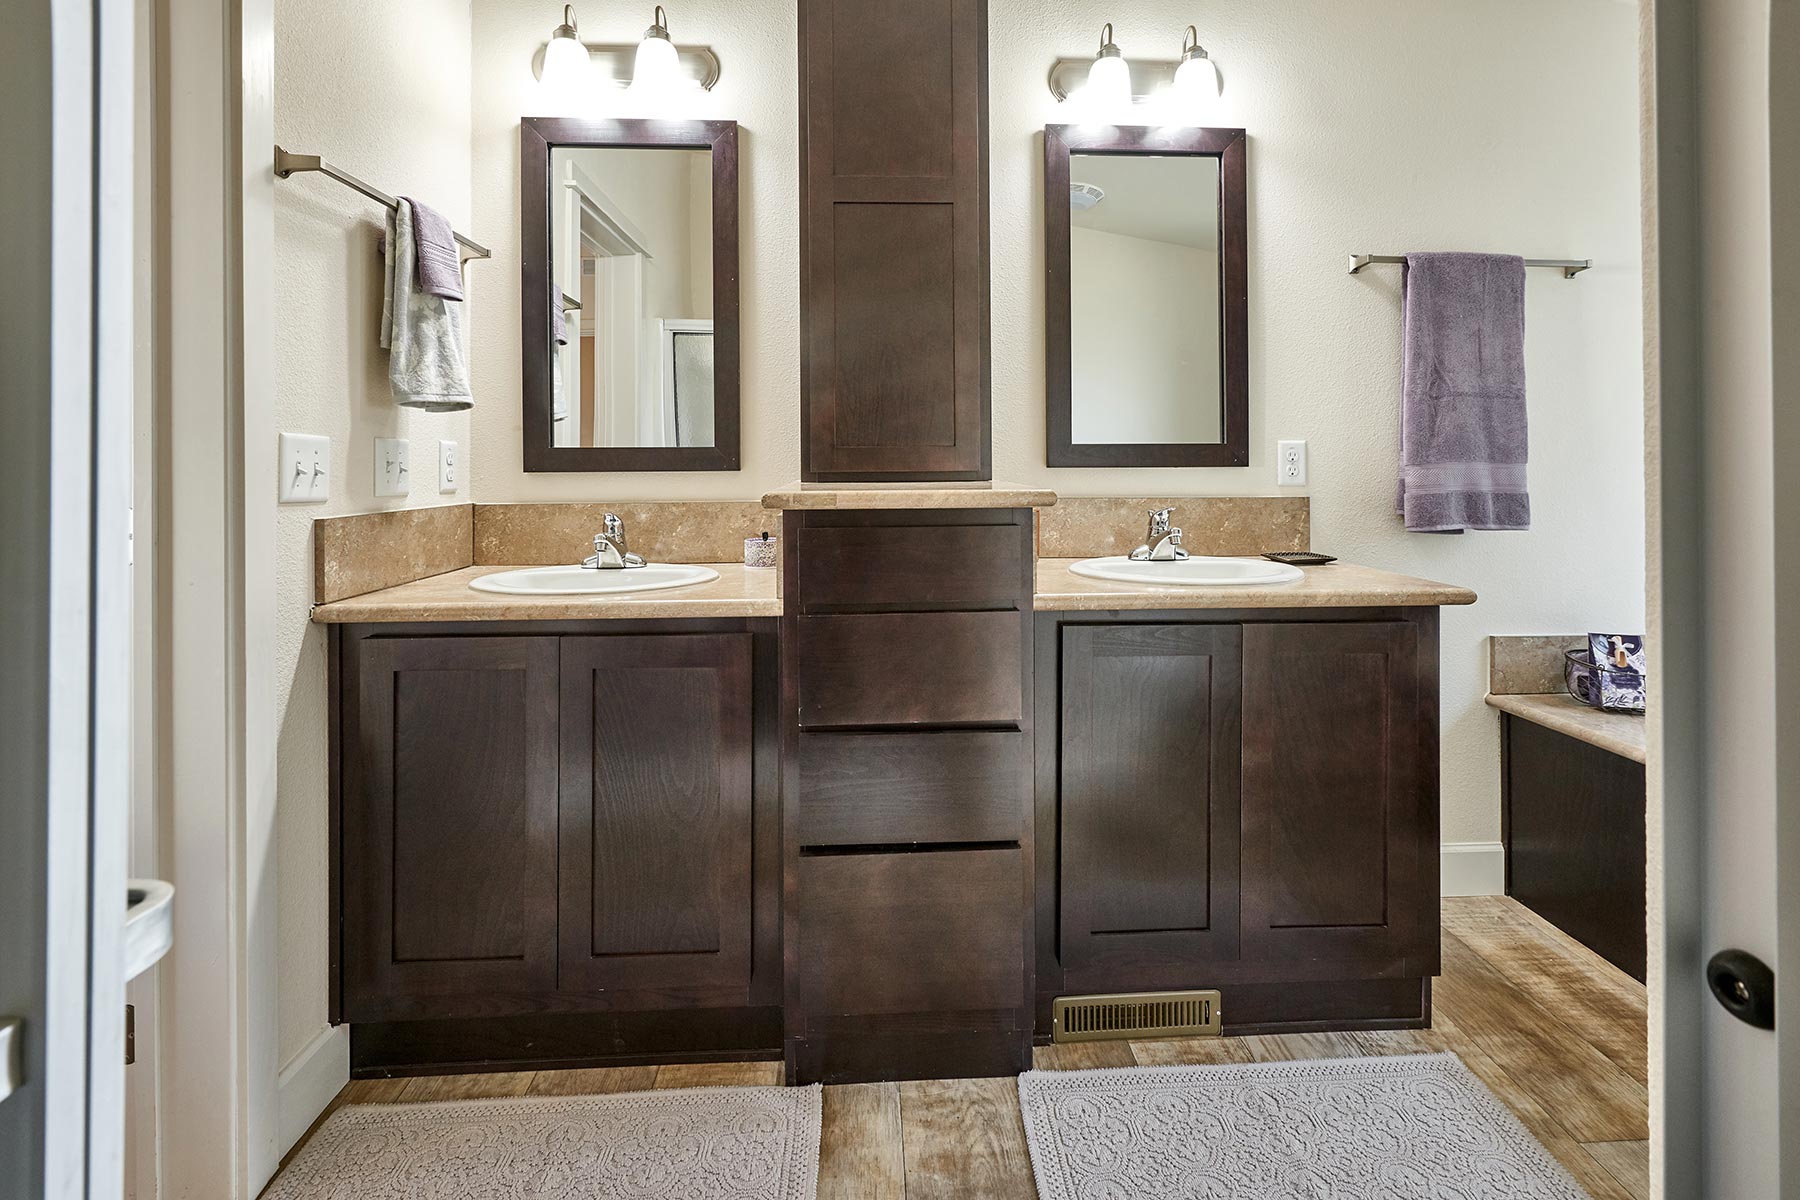 Skyline Homes Westridge 1218CT Manufactured Home Master bathroom double vanity with drawer bank in center